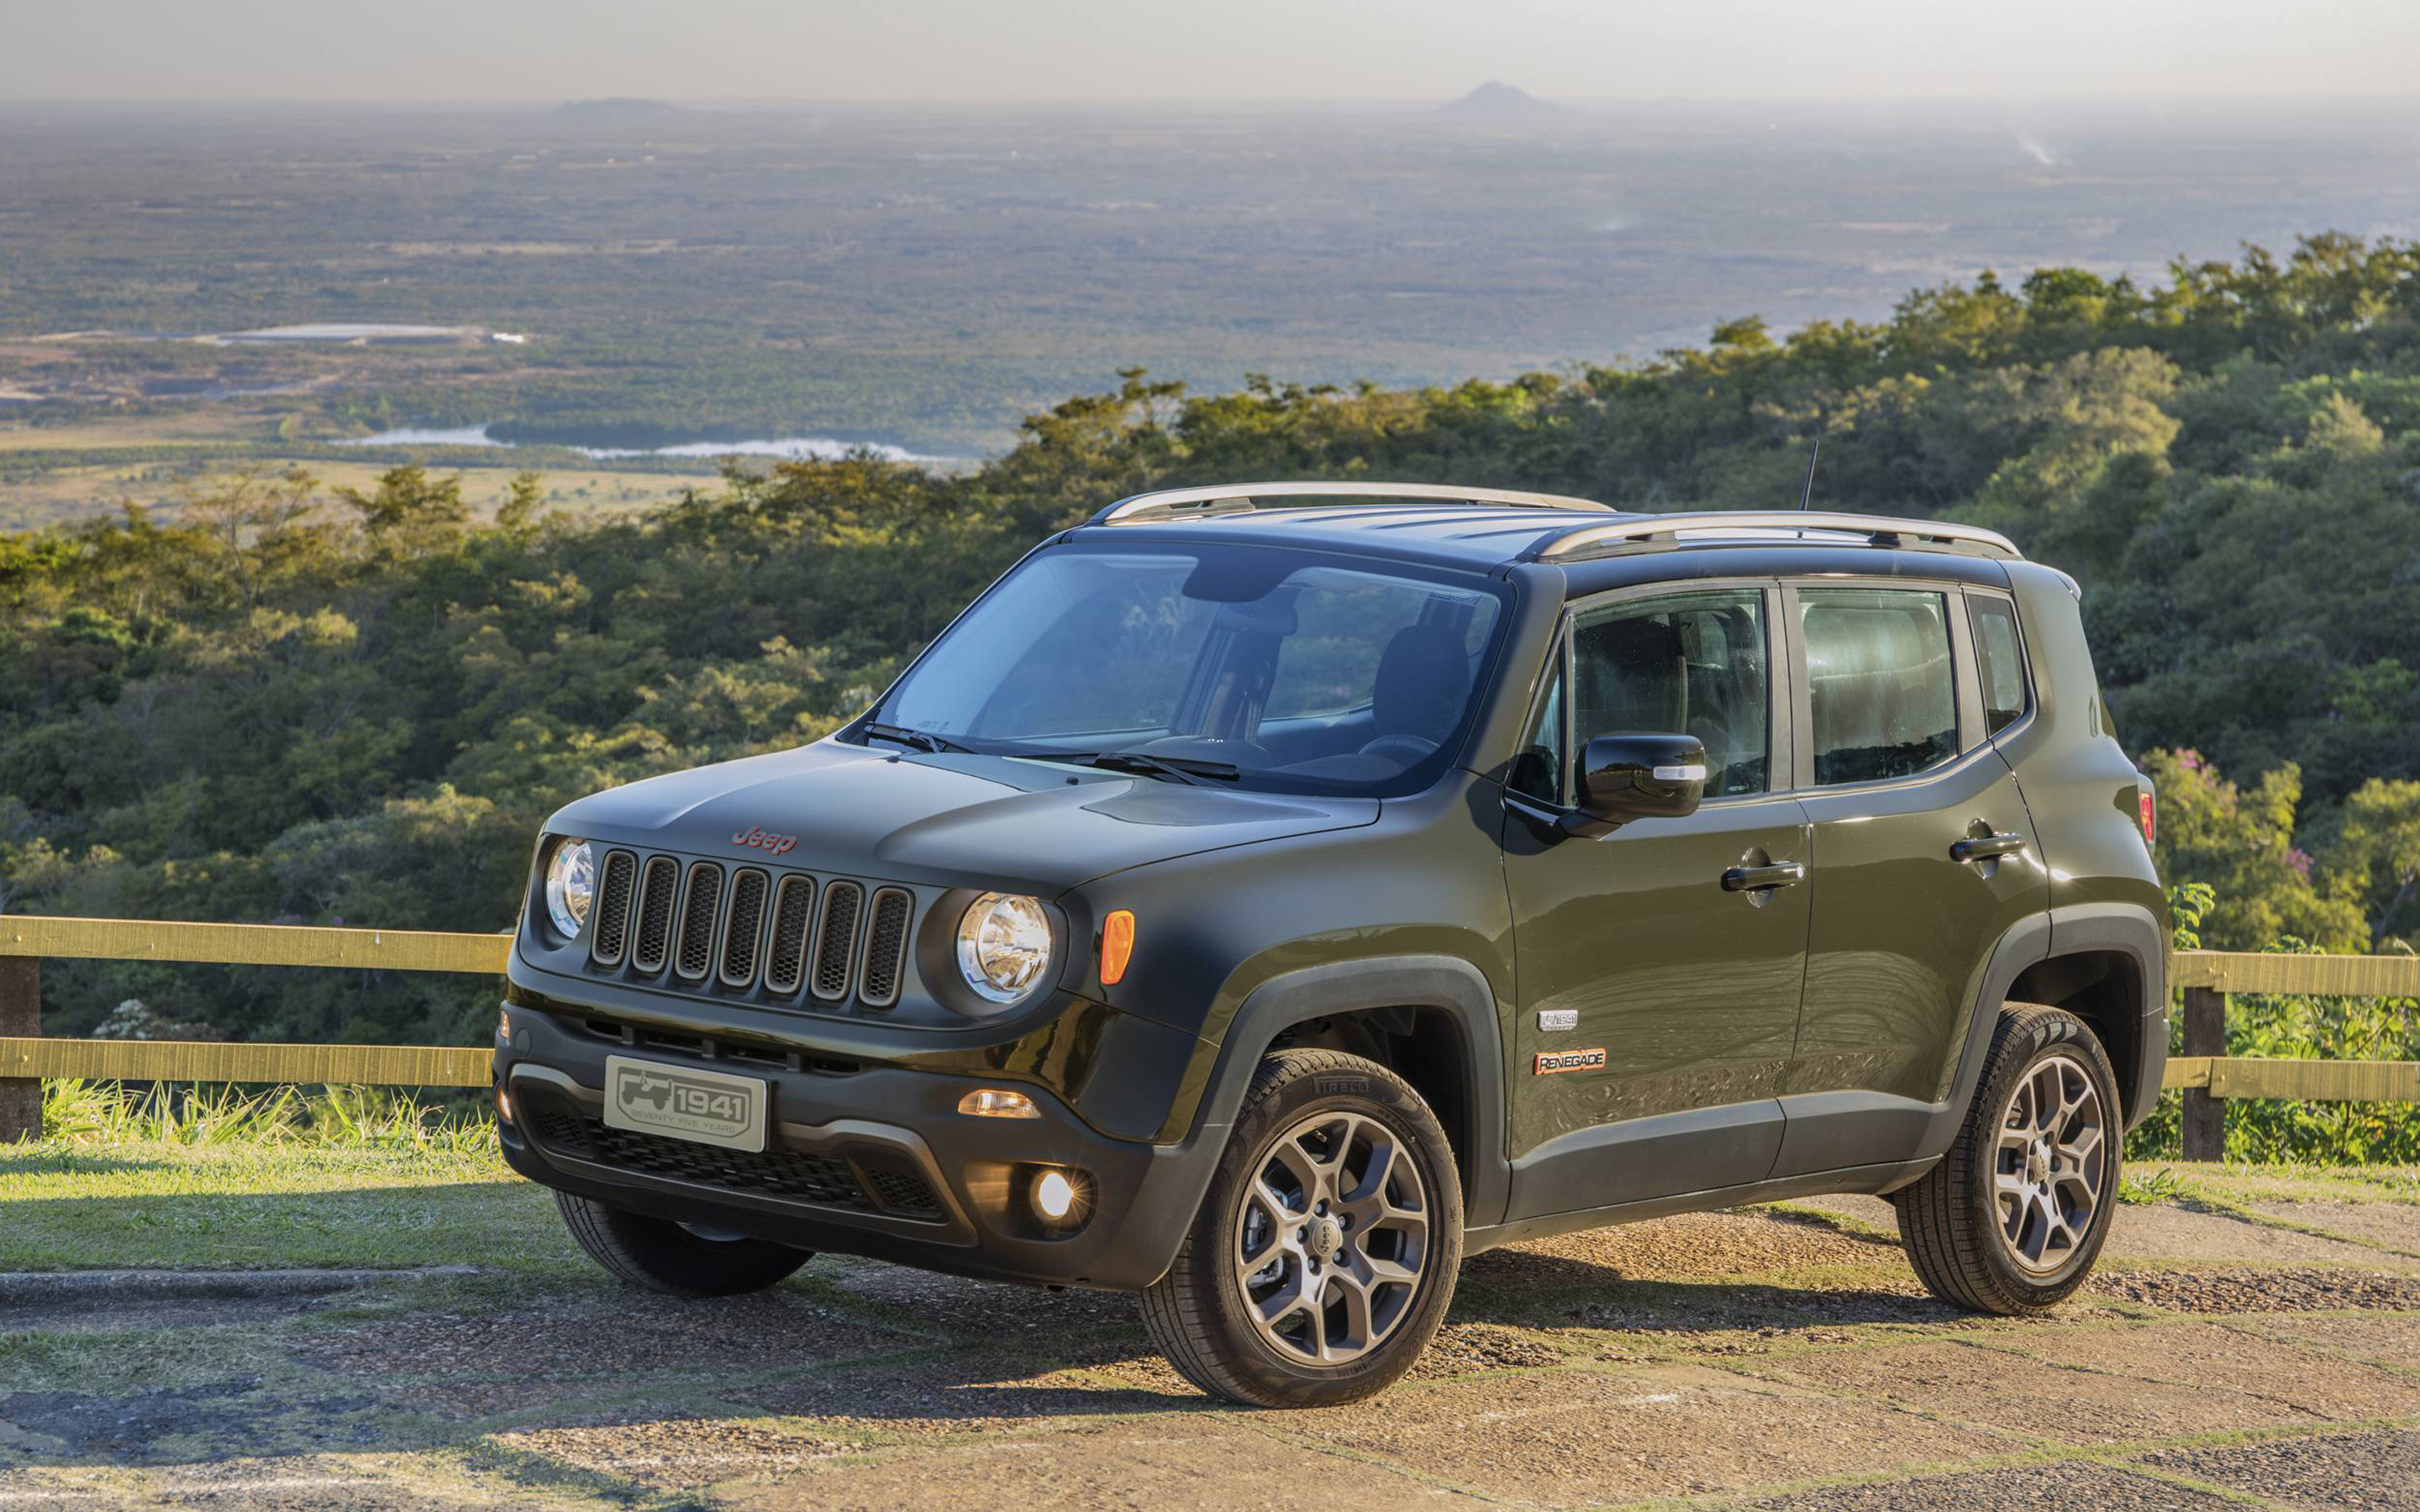 Jeep Renegade, Road exploration, Green SUV, High-quality pictures, 2880x1800 HD Desktop